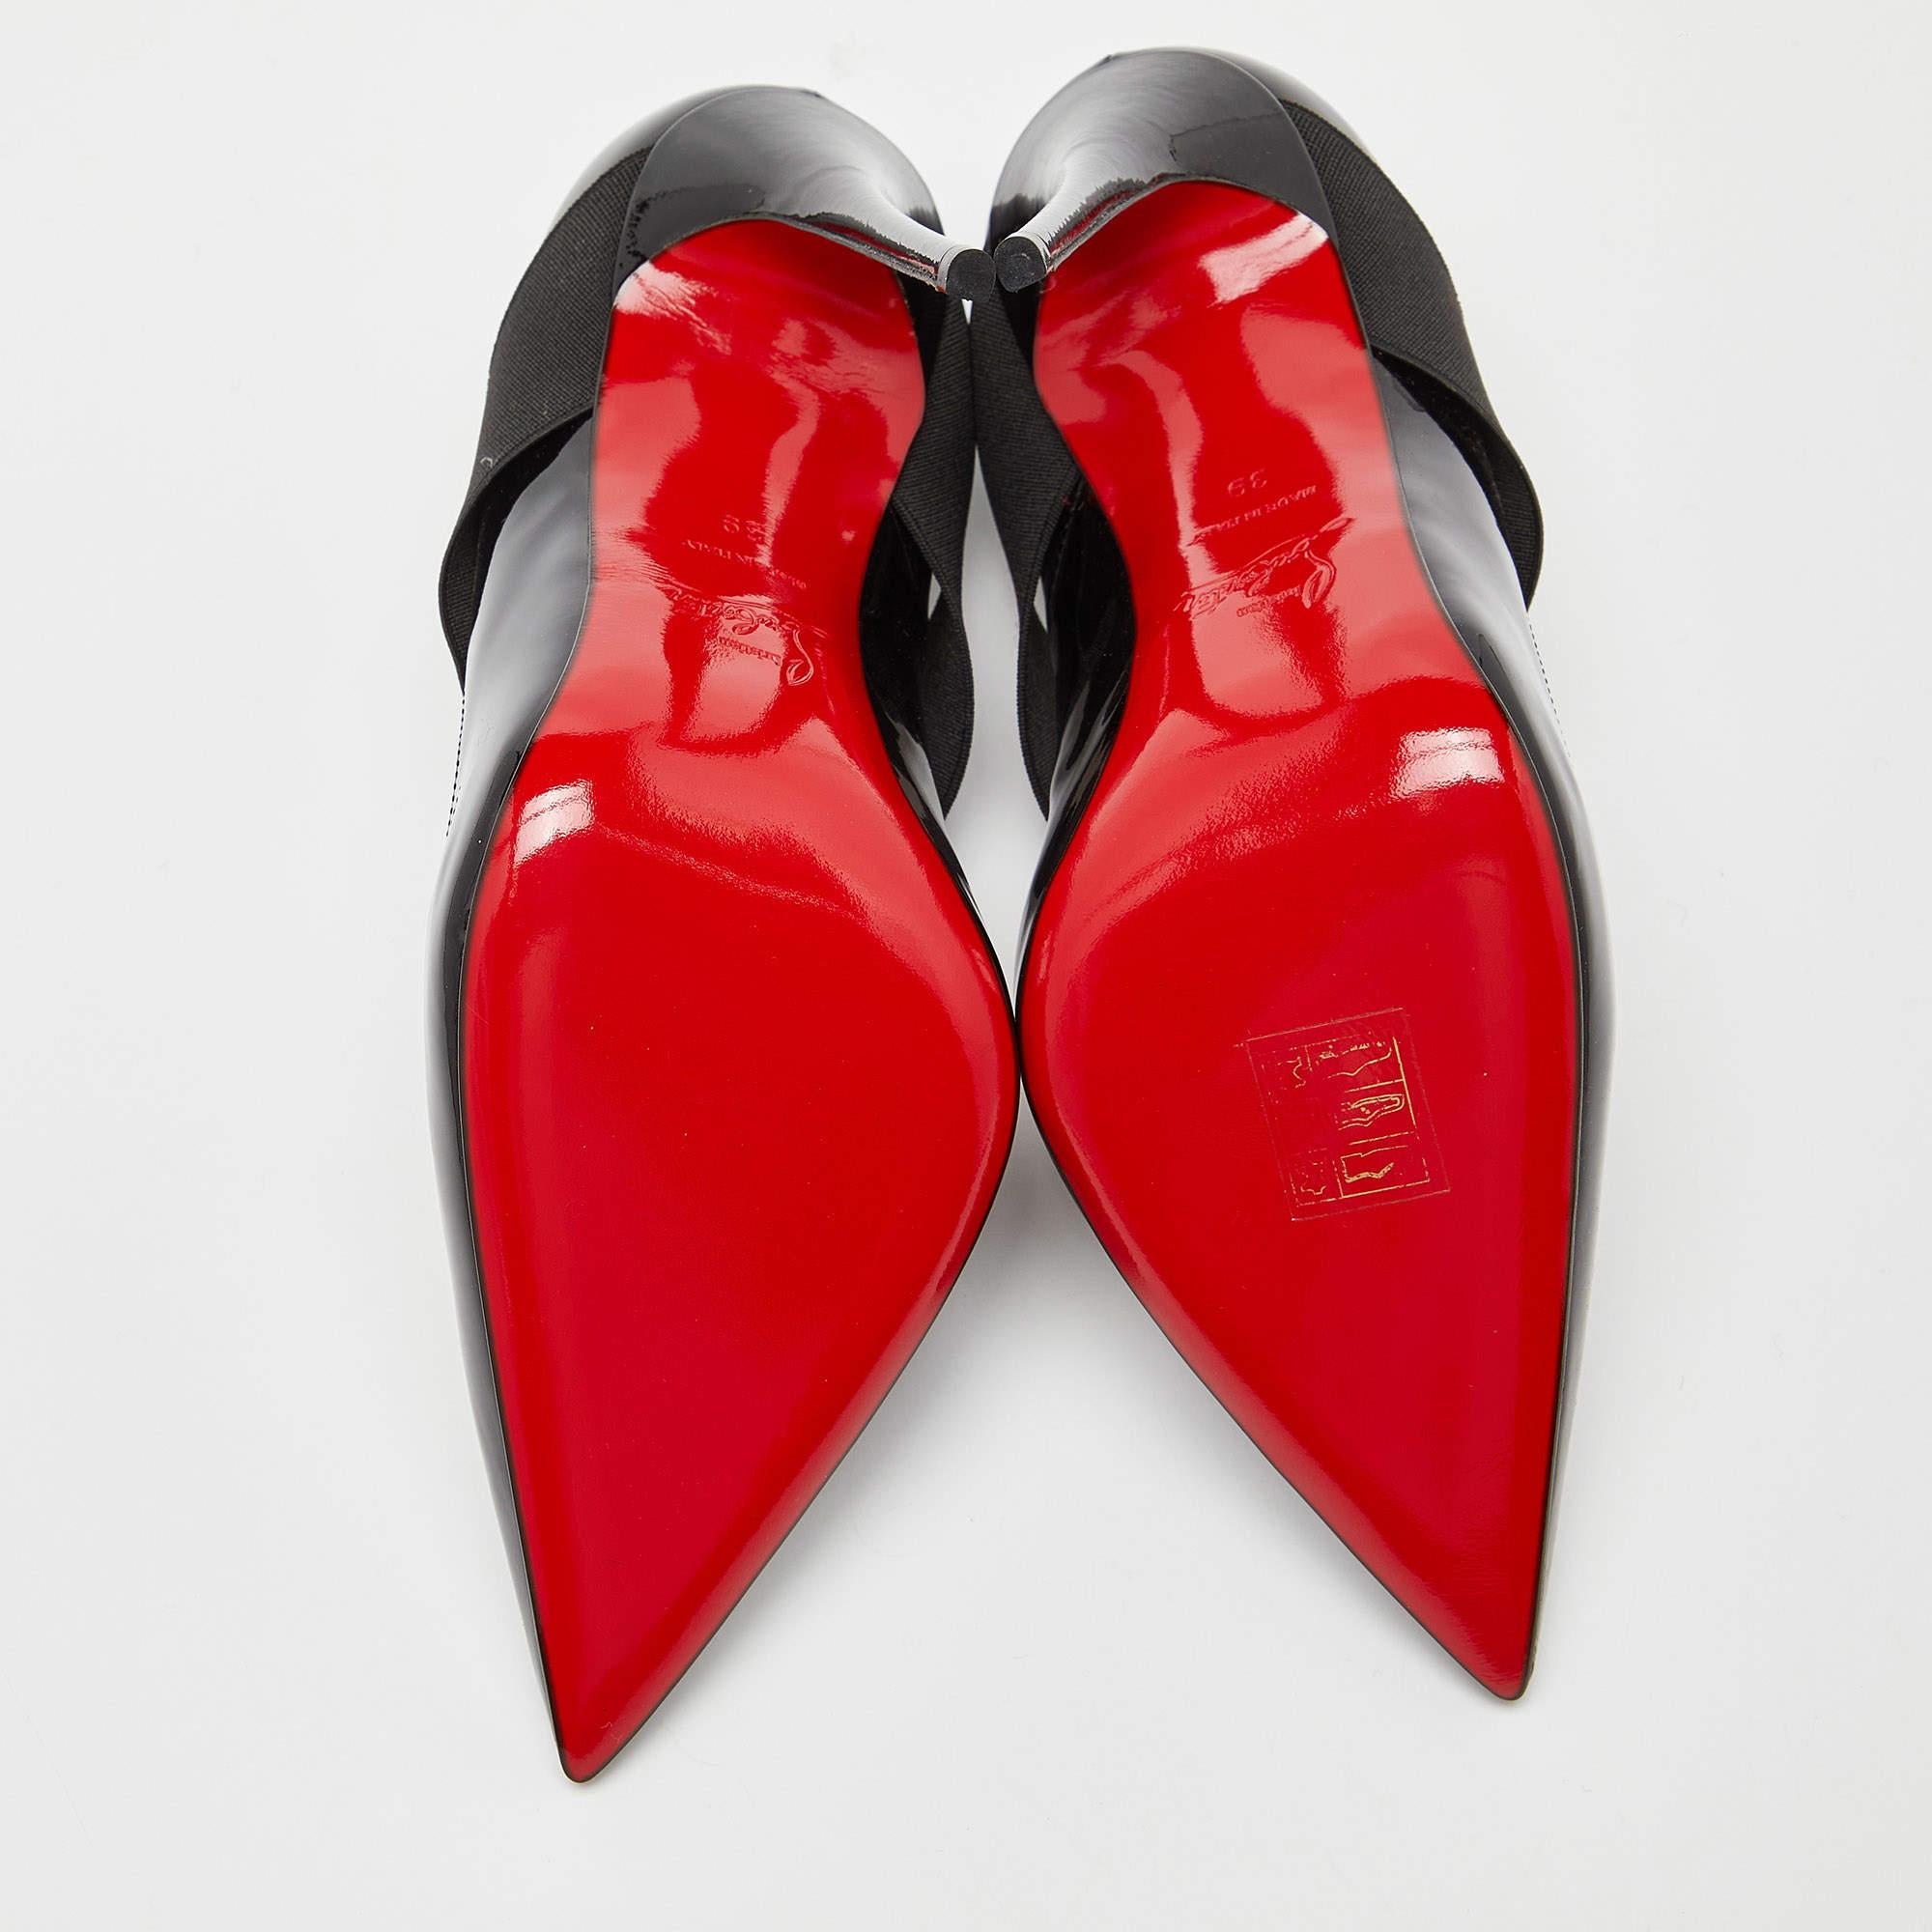 Christian Louboutin Black Patent Leather Sharpstagram Pointed Toe Pumps  2